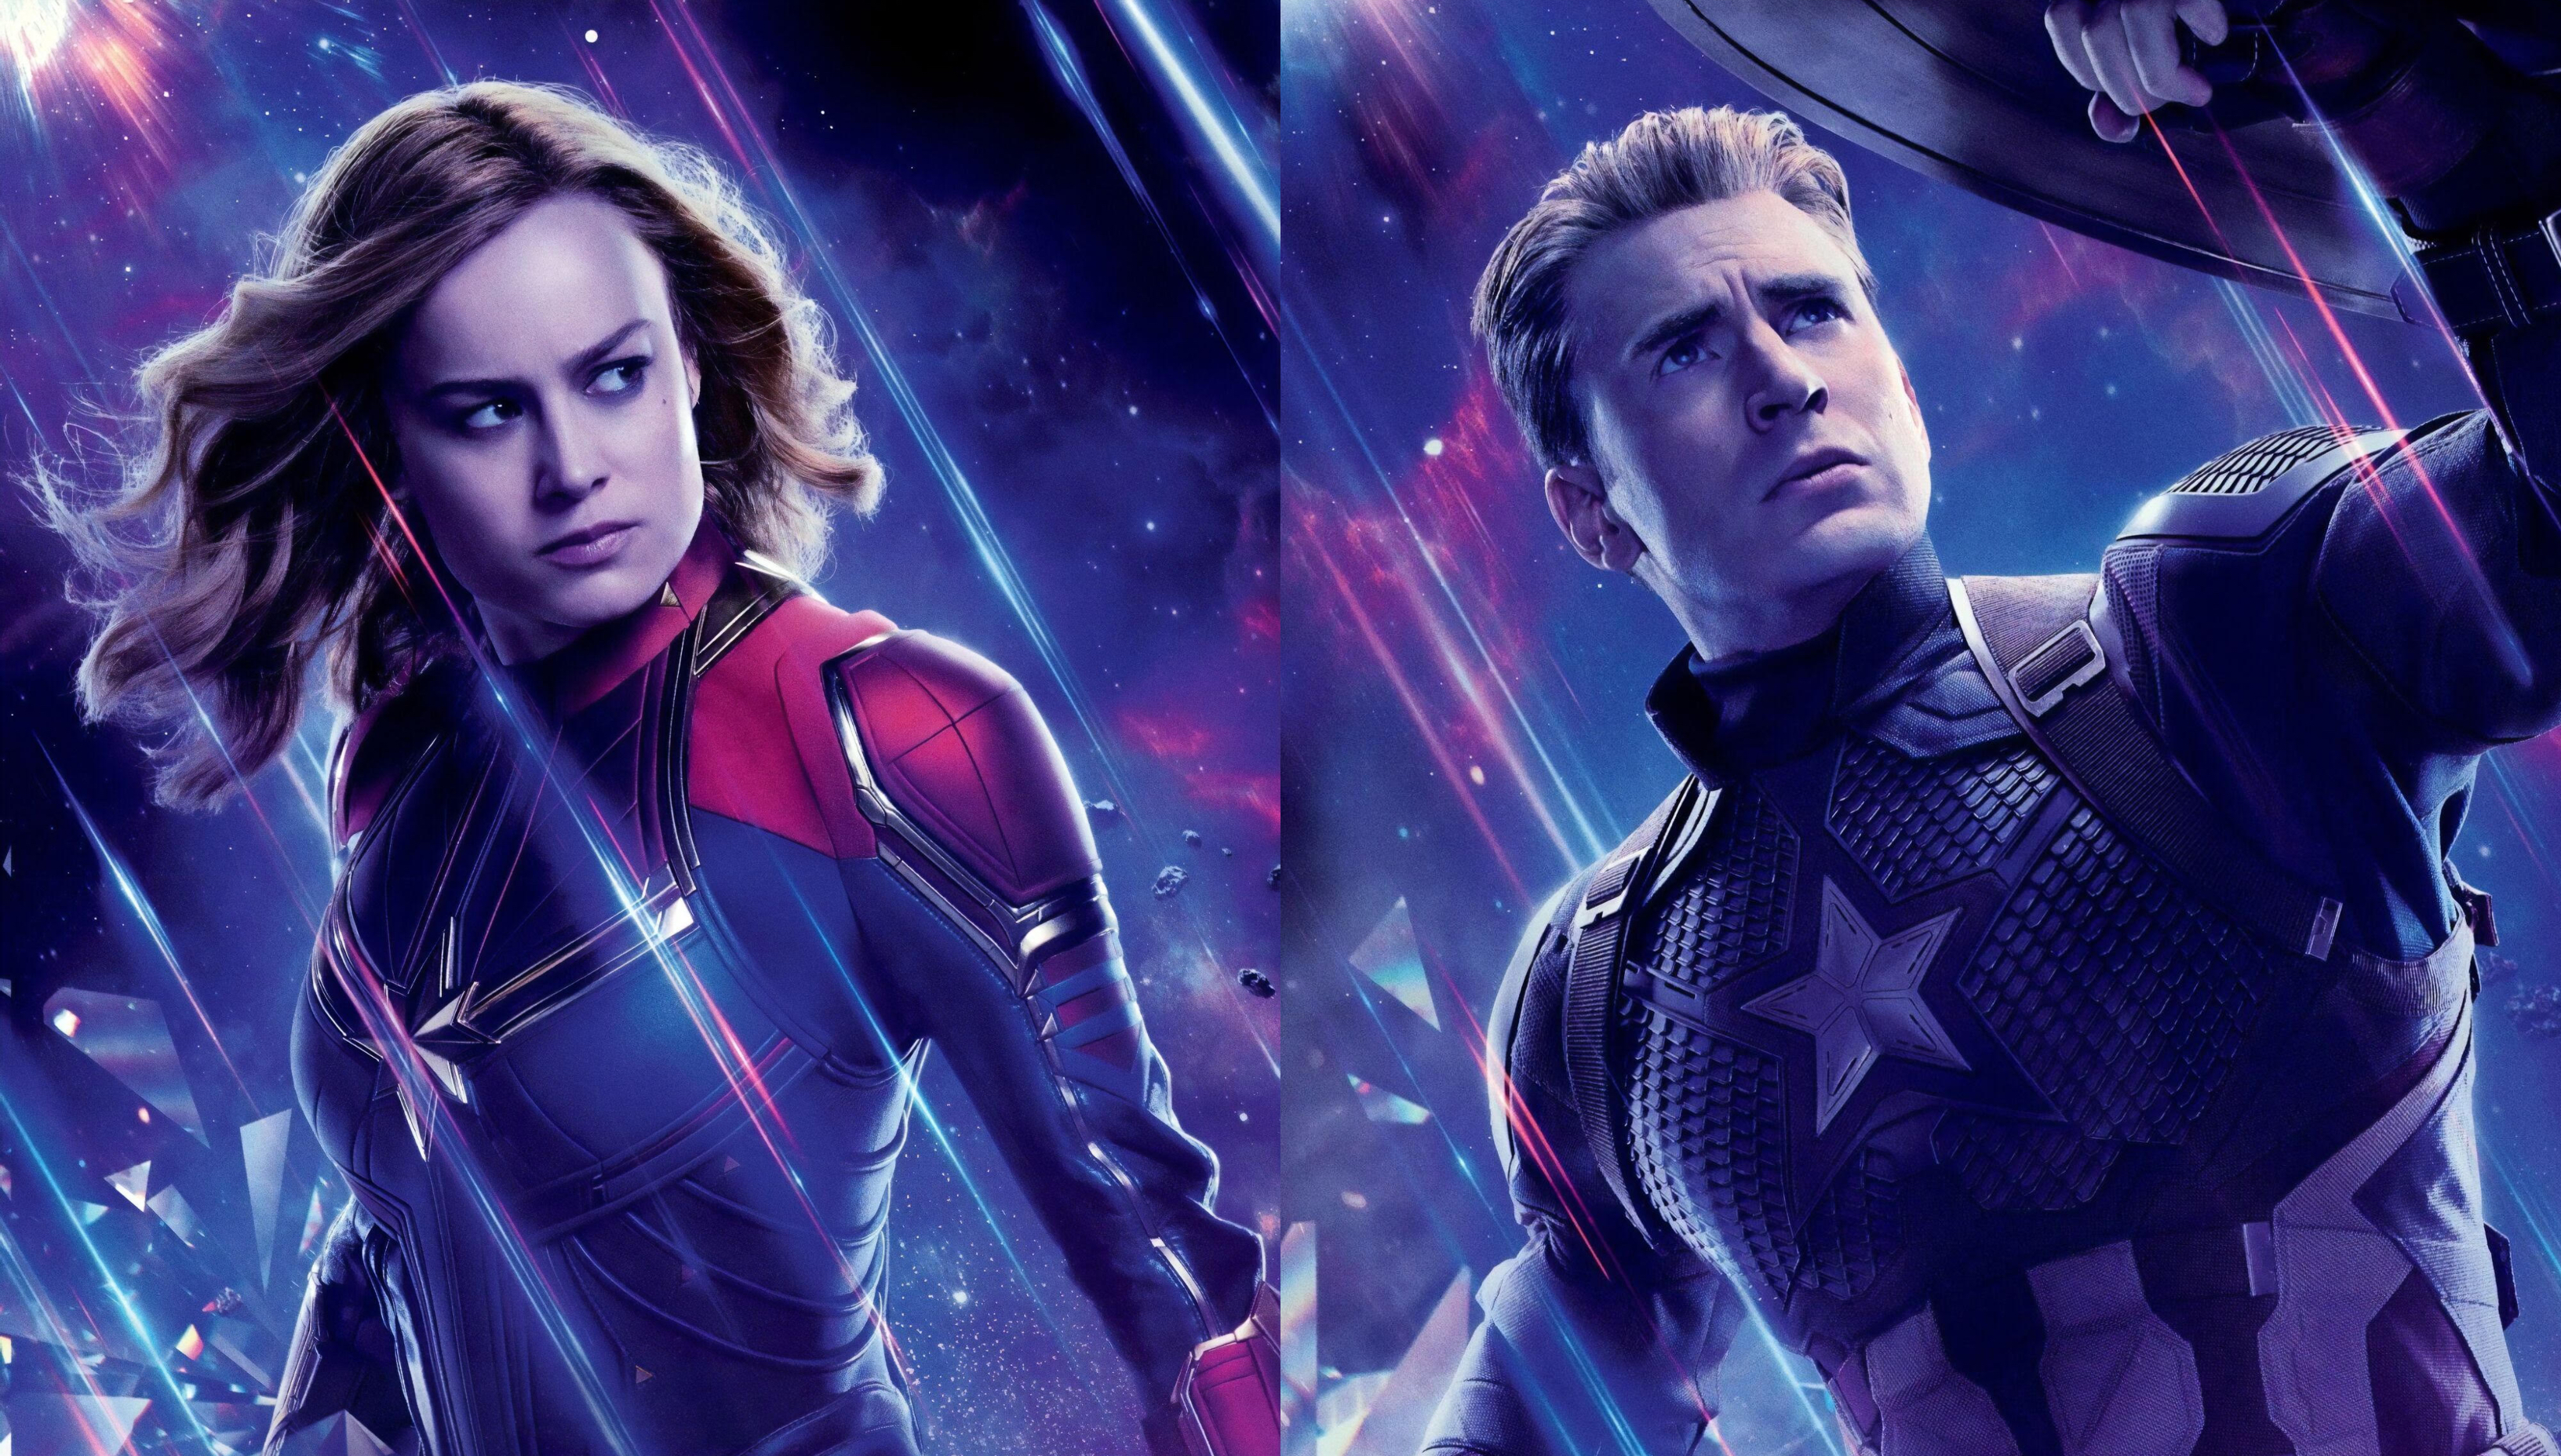 Brie Larson and Chris Evans Want to be in Kevin Feige’s Star Wars Story